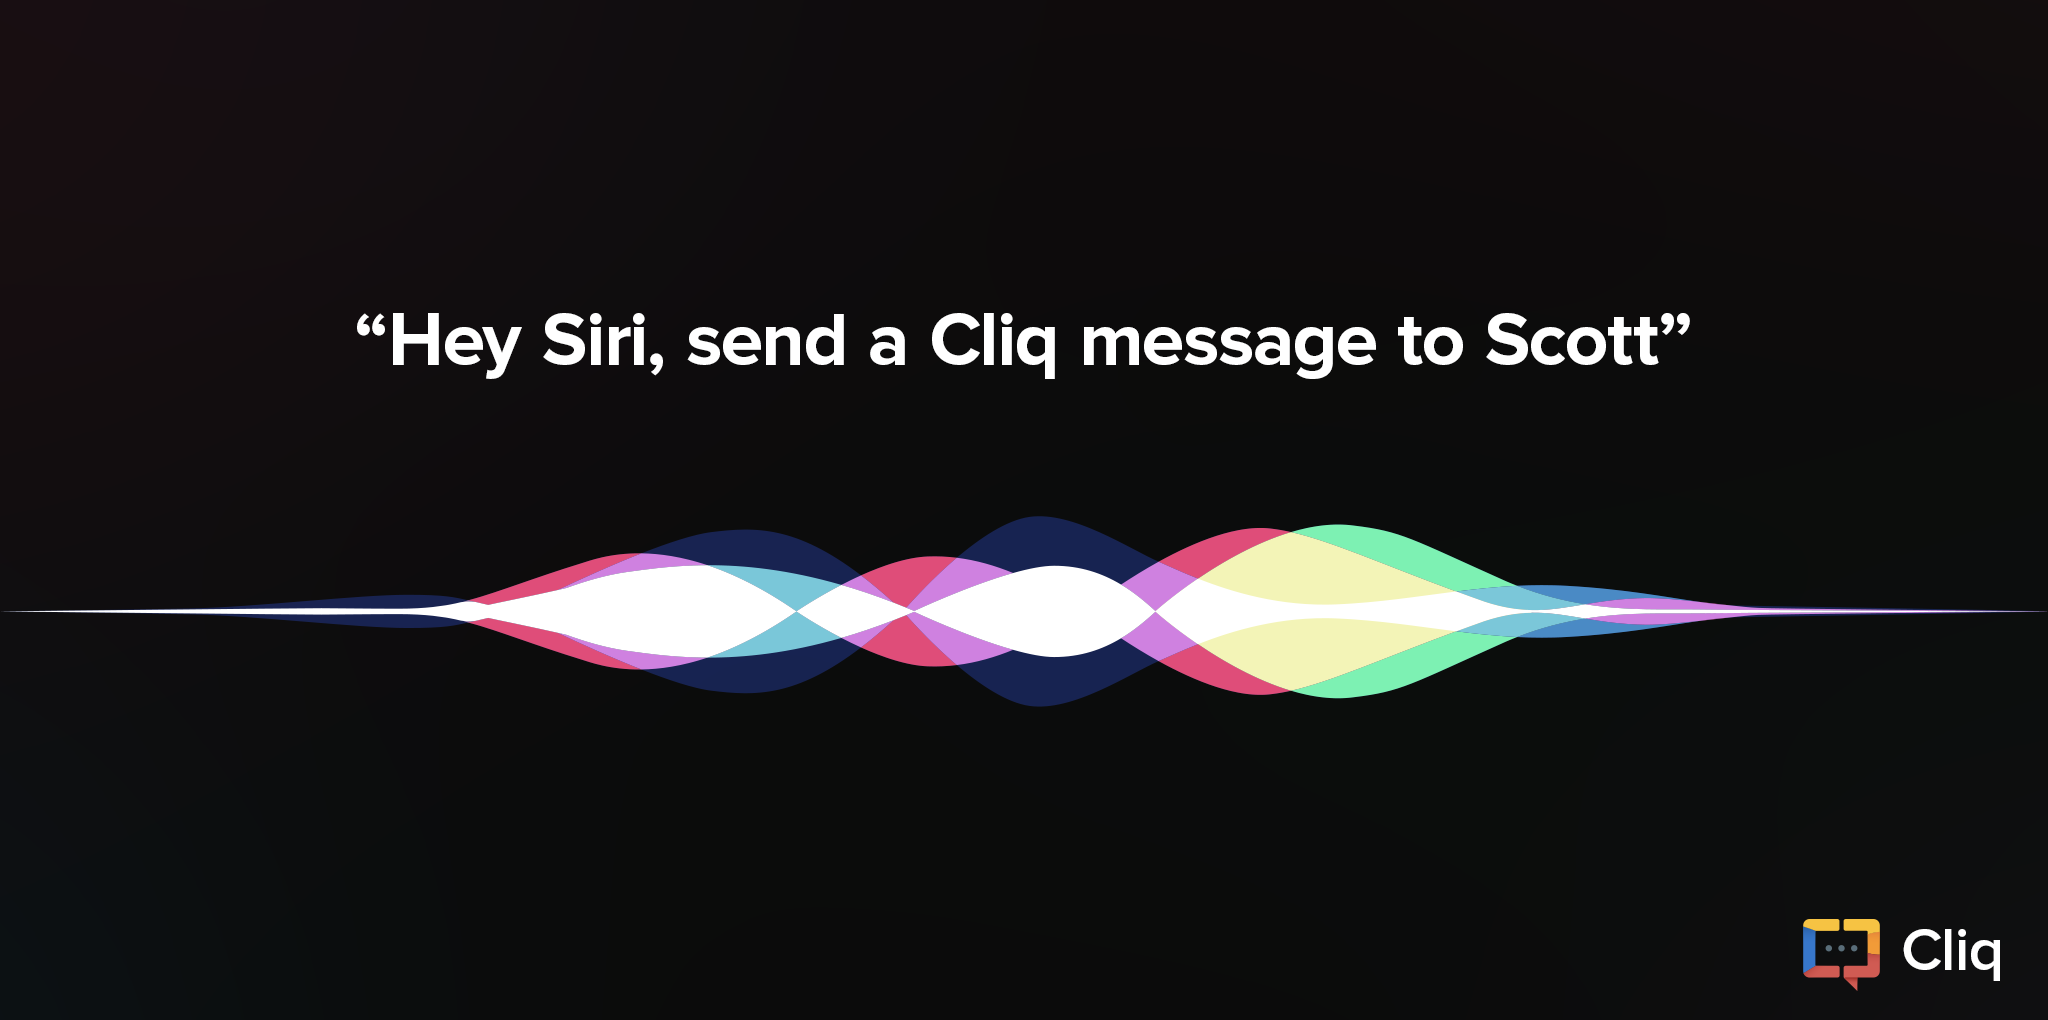 Hey Siri, let's get more productive!